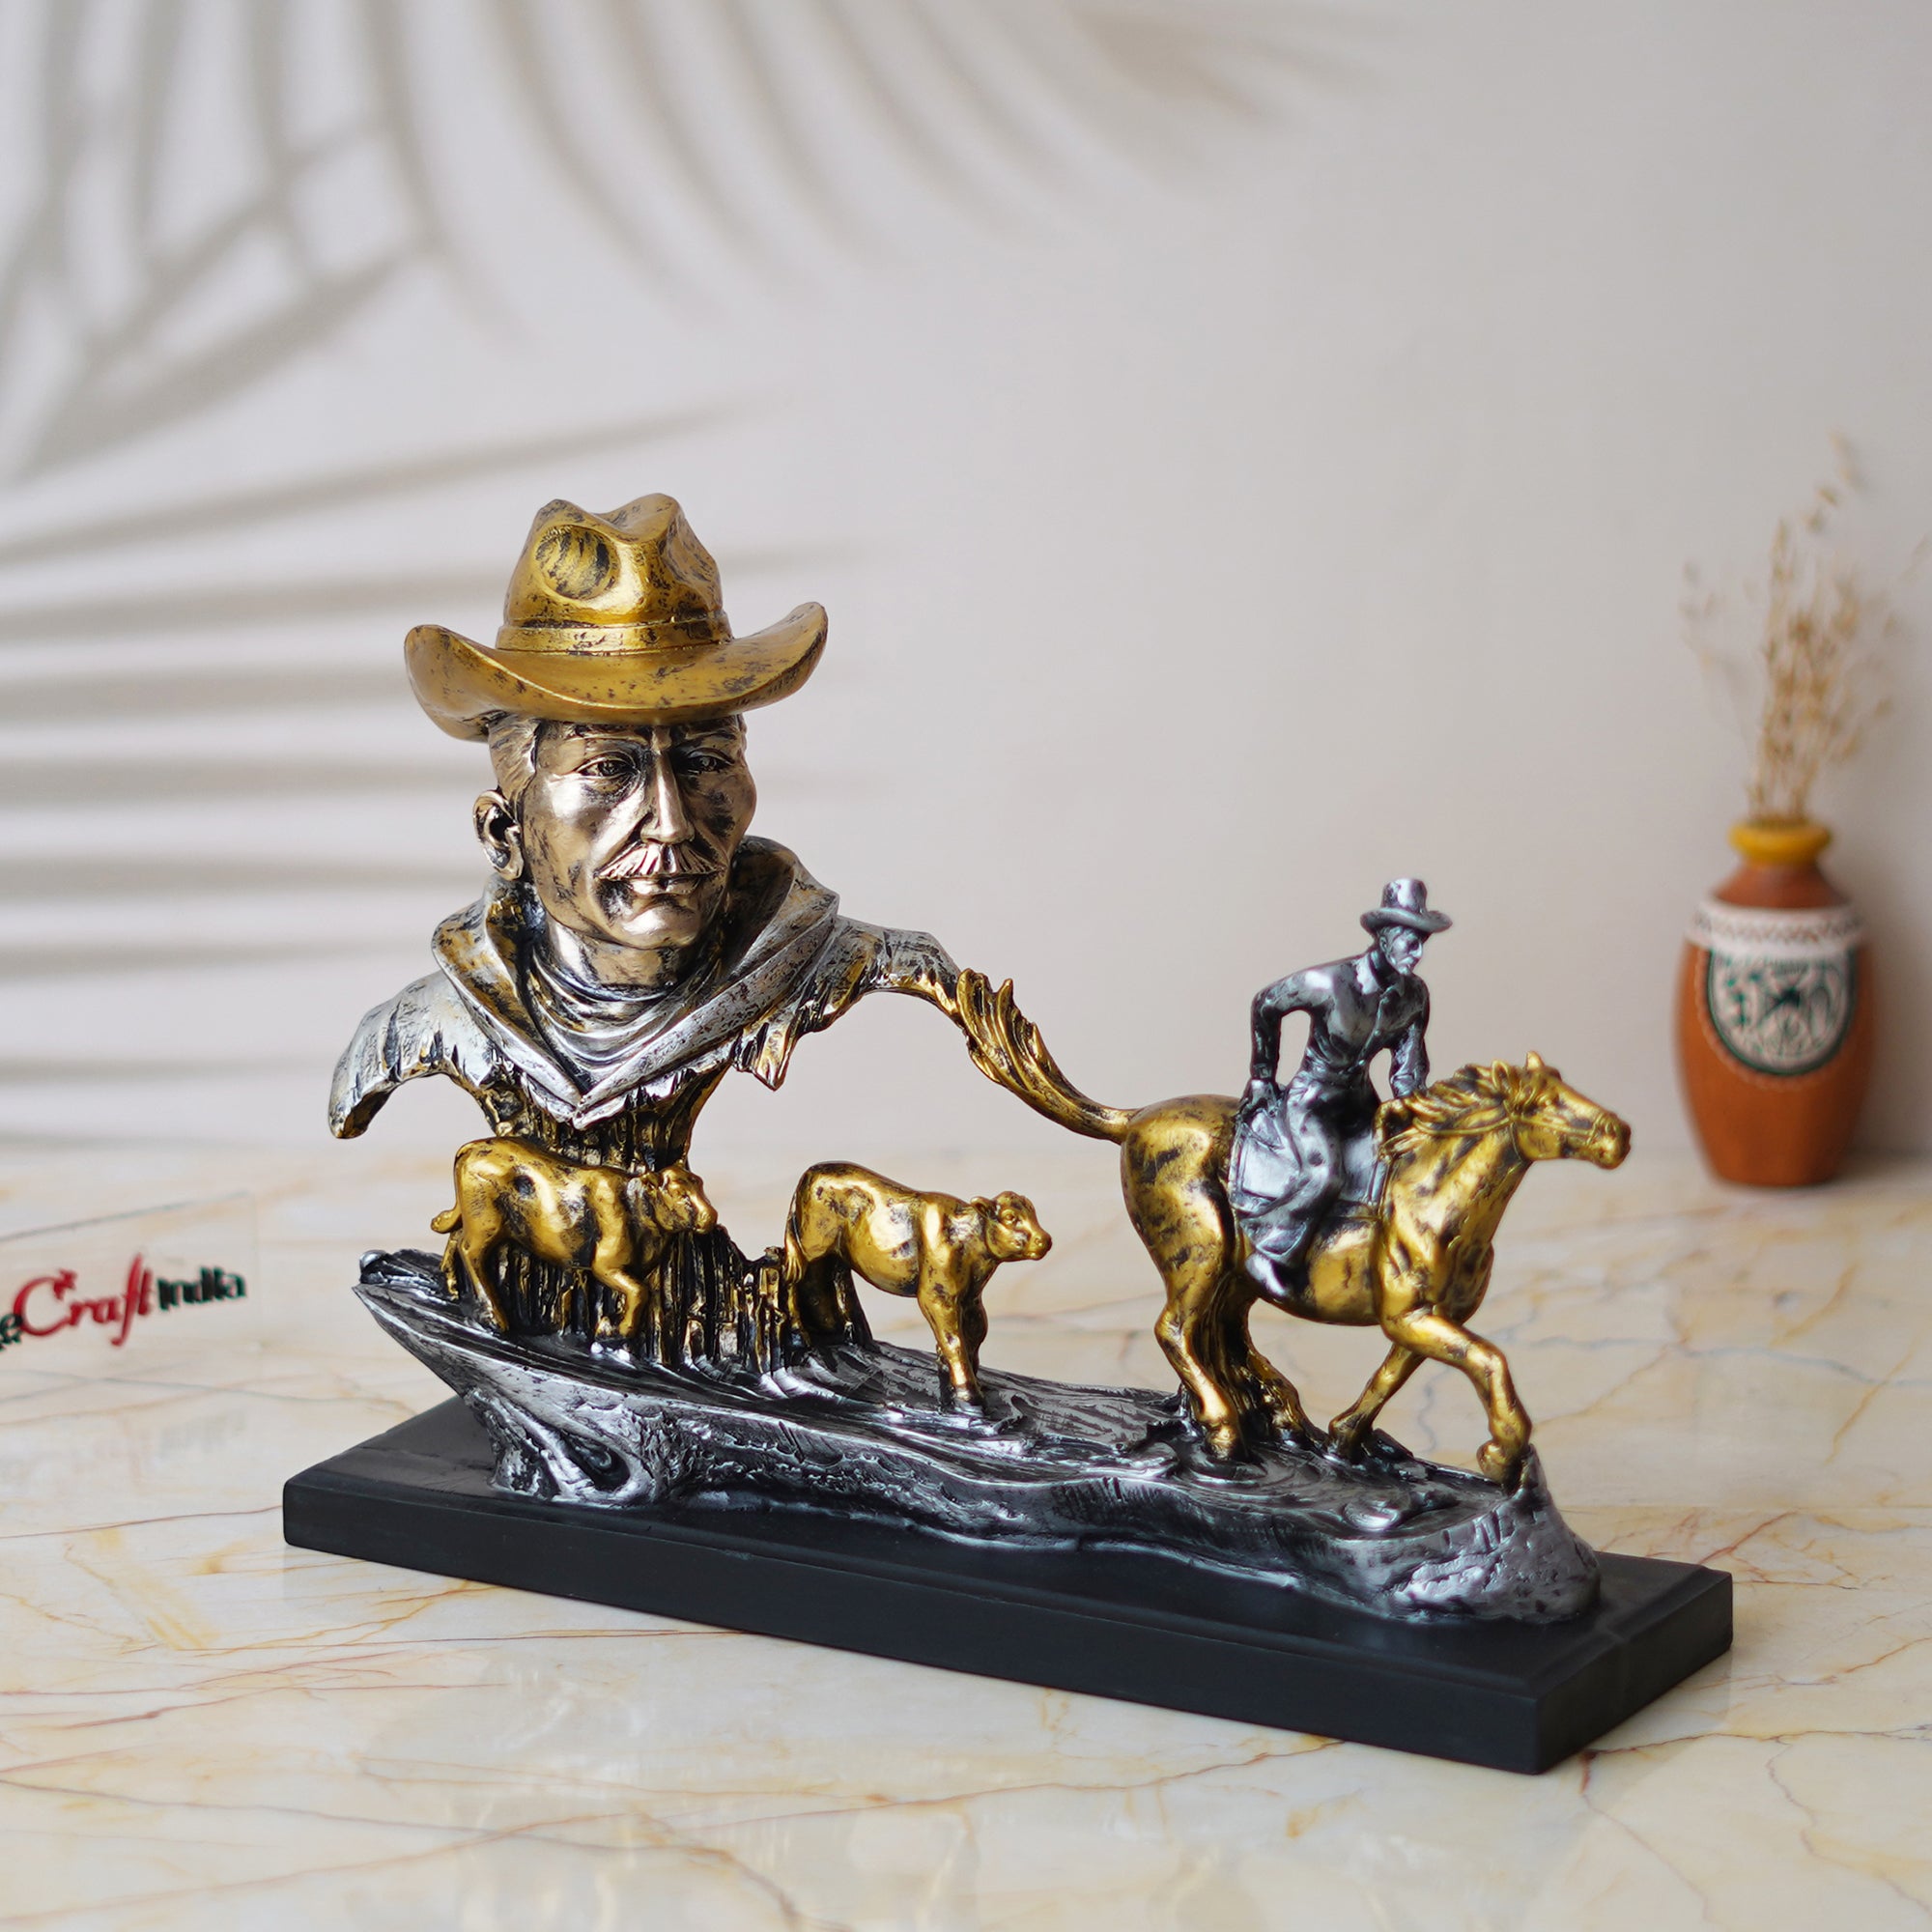 Antique Cowboys Face with Boy Sitting on Running Horse & Cow Statues Decorative Showpiece 5